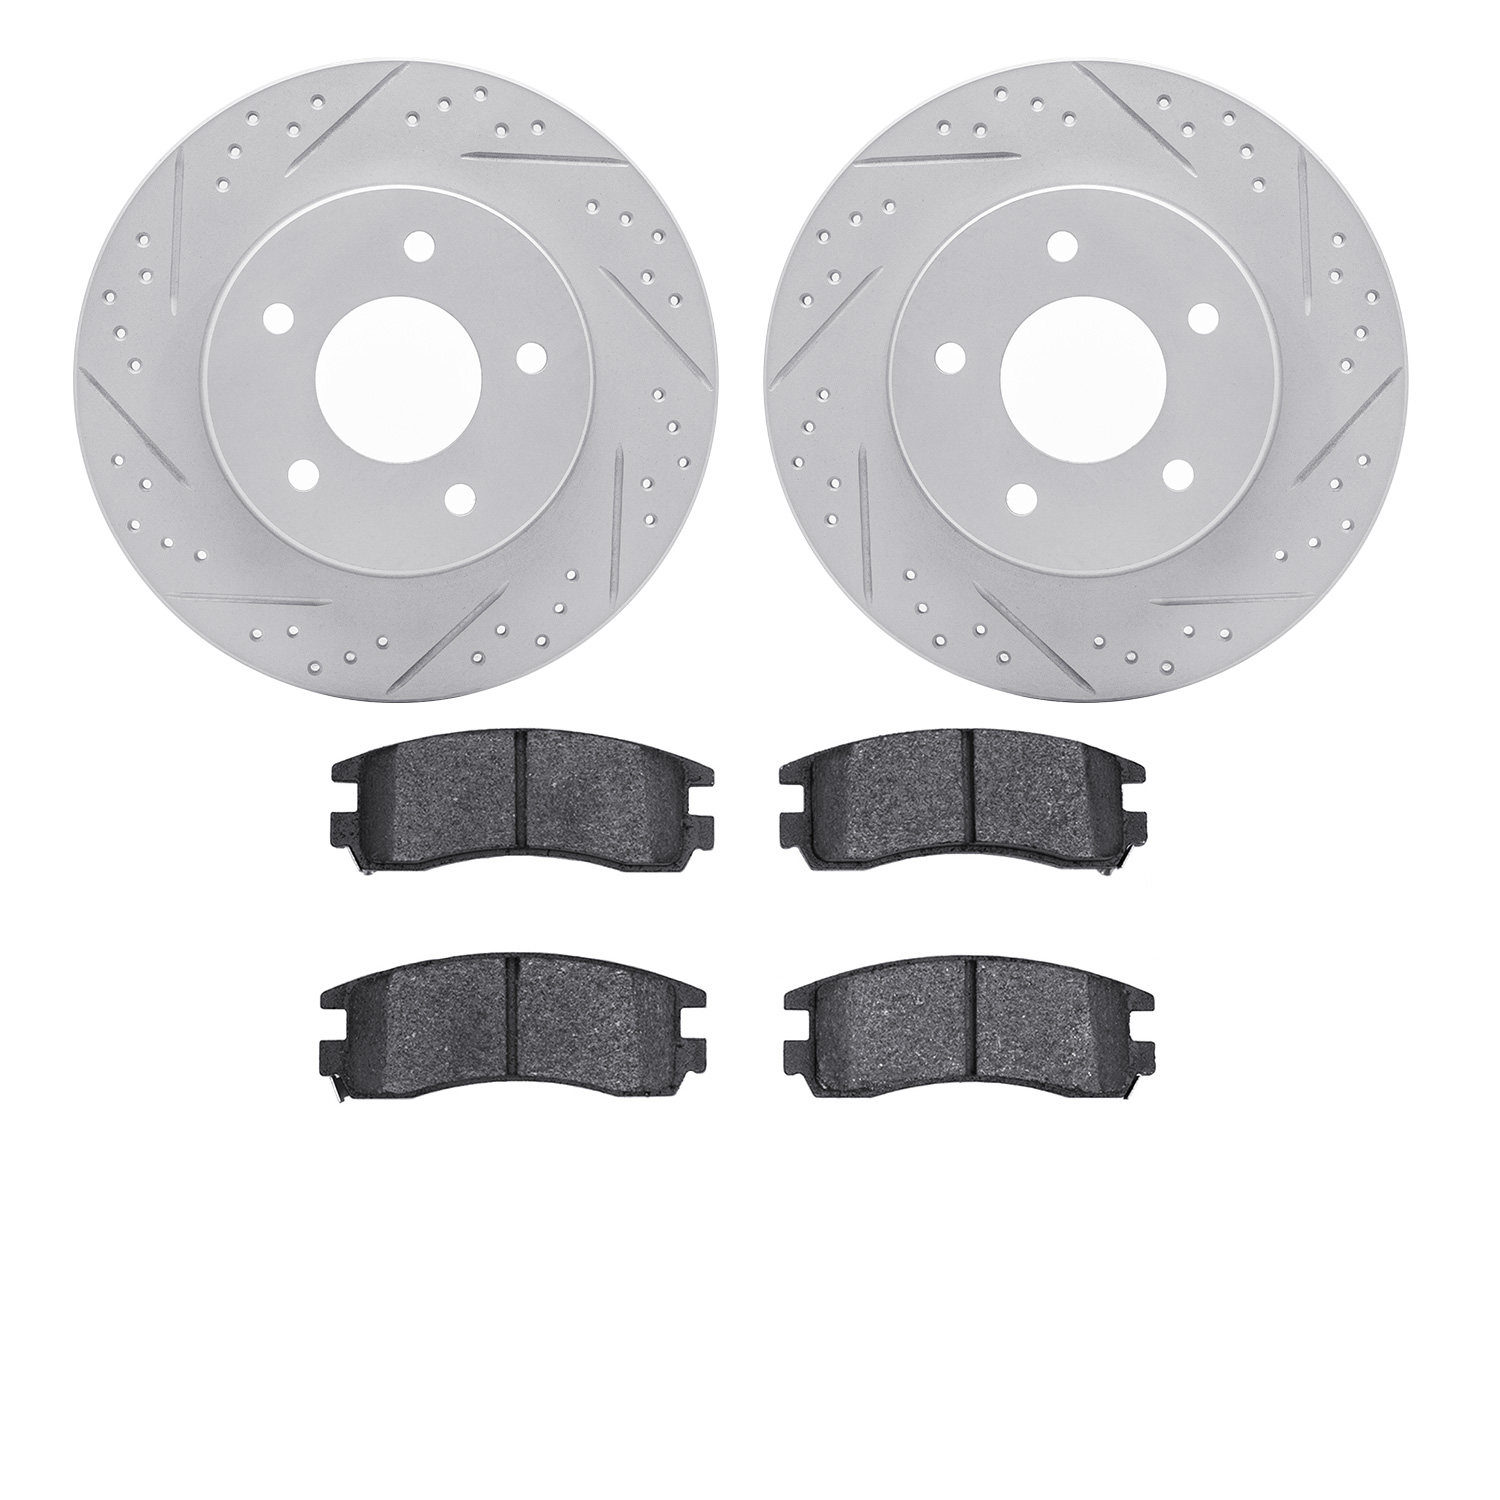 2502-52002 Geoperformance Drilled/Slotted Rotors w/5000 Advanced Brake Pads Kit, 1997-2005 GM, Position: Rear